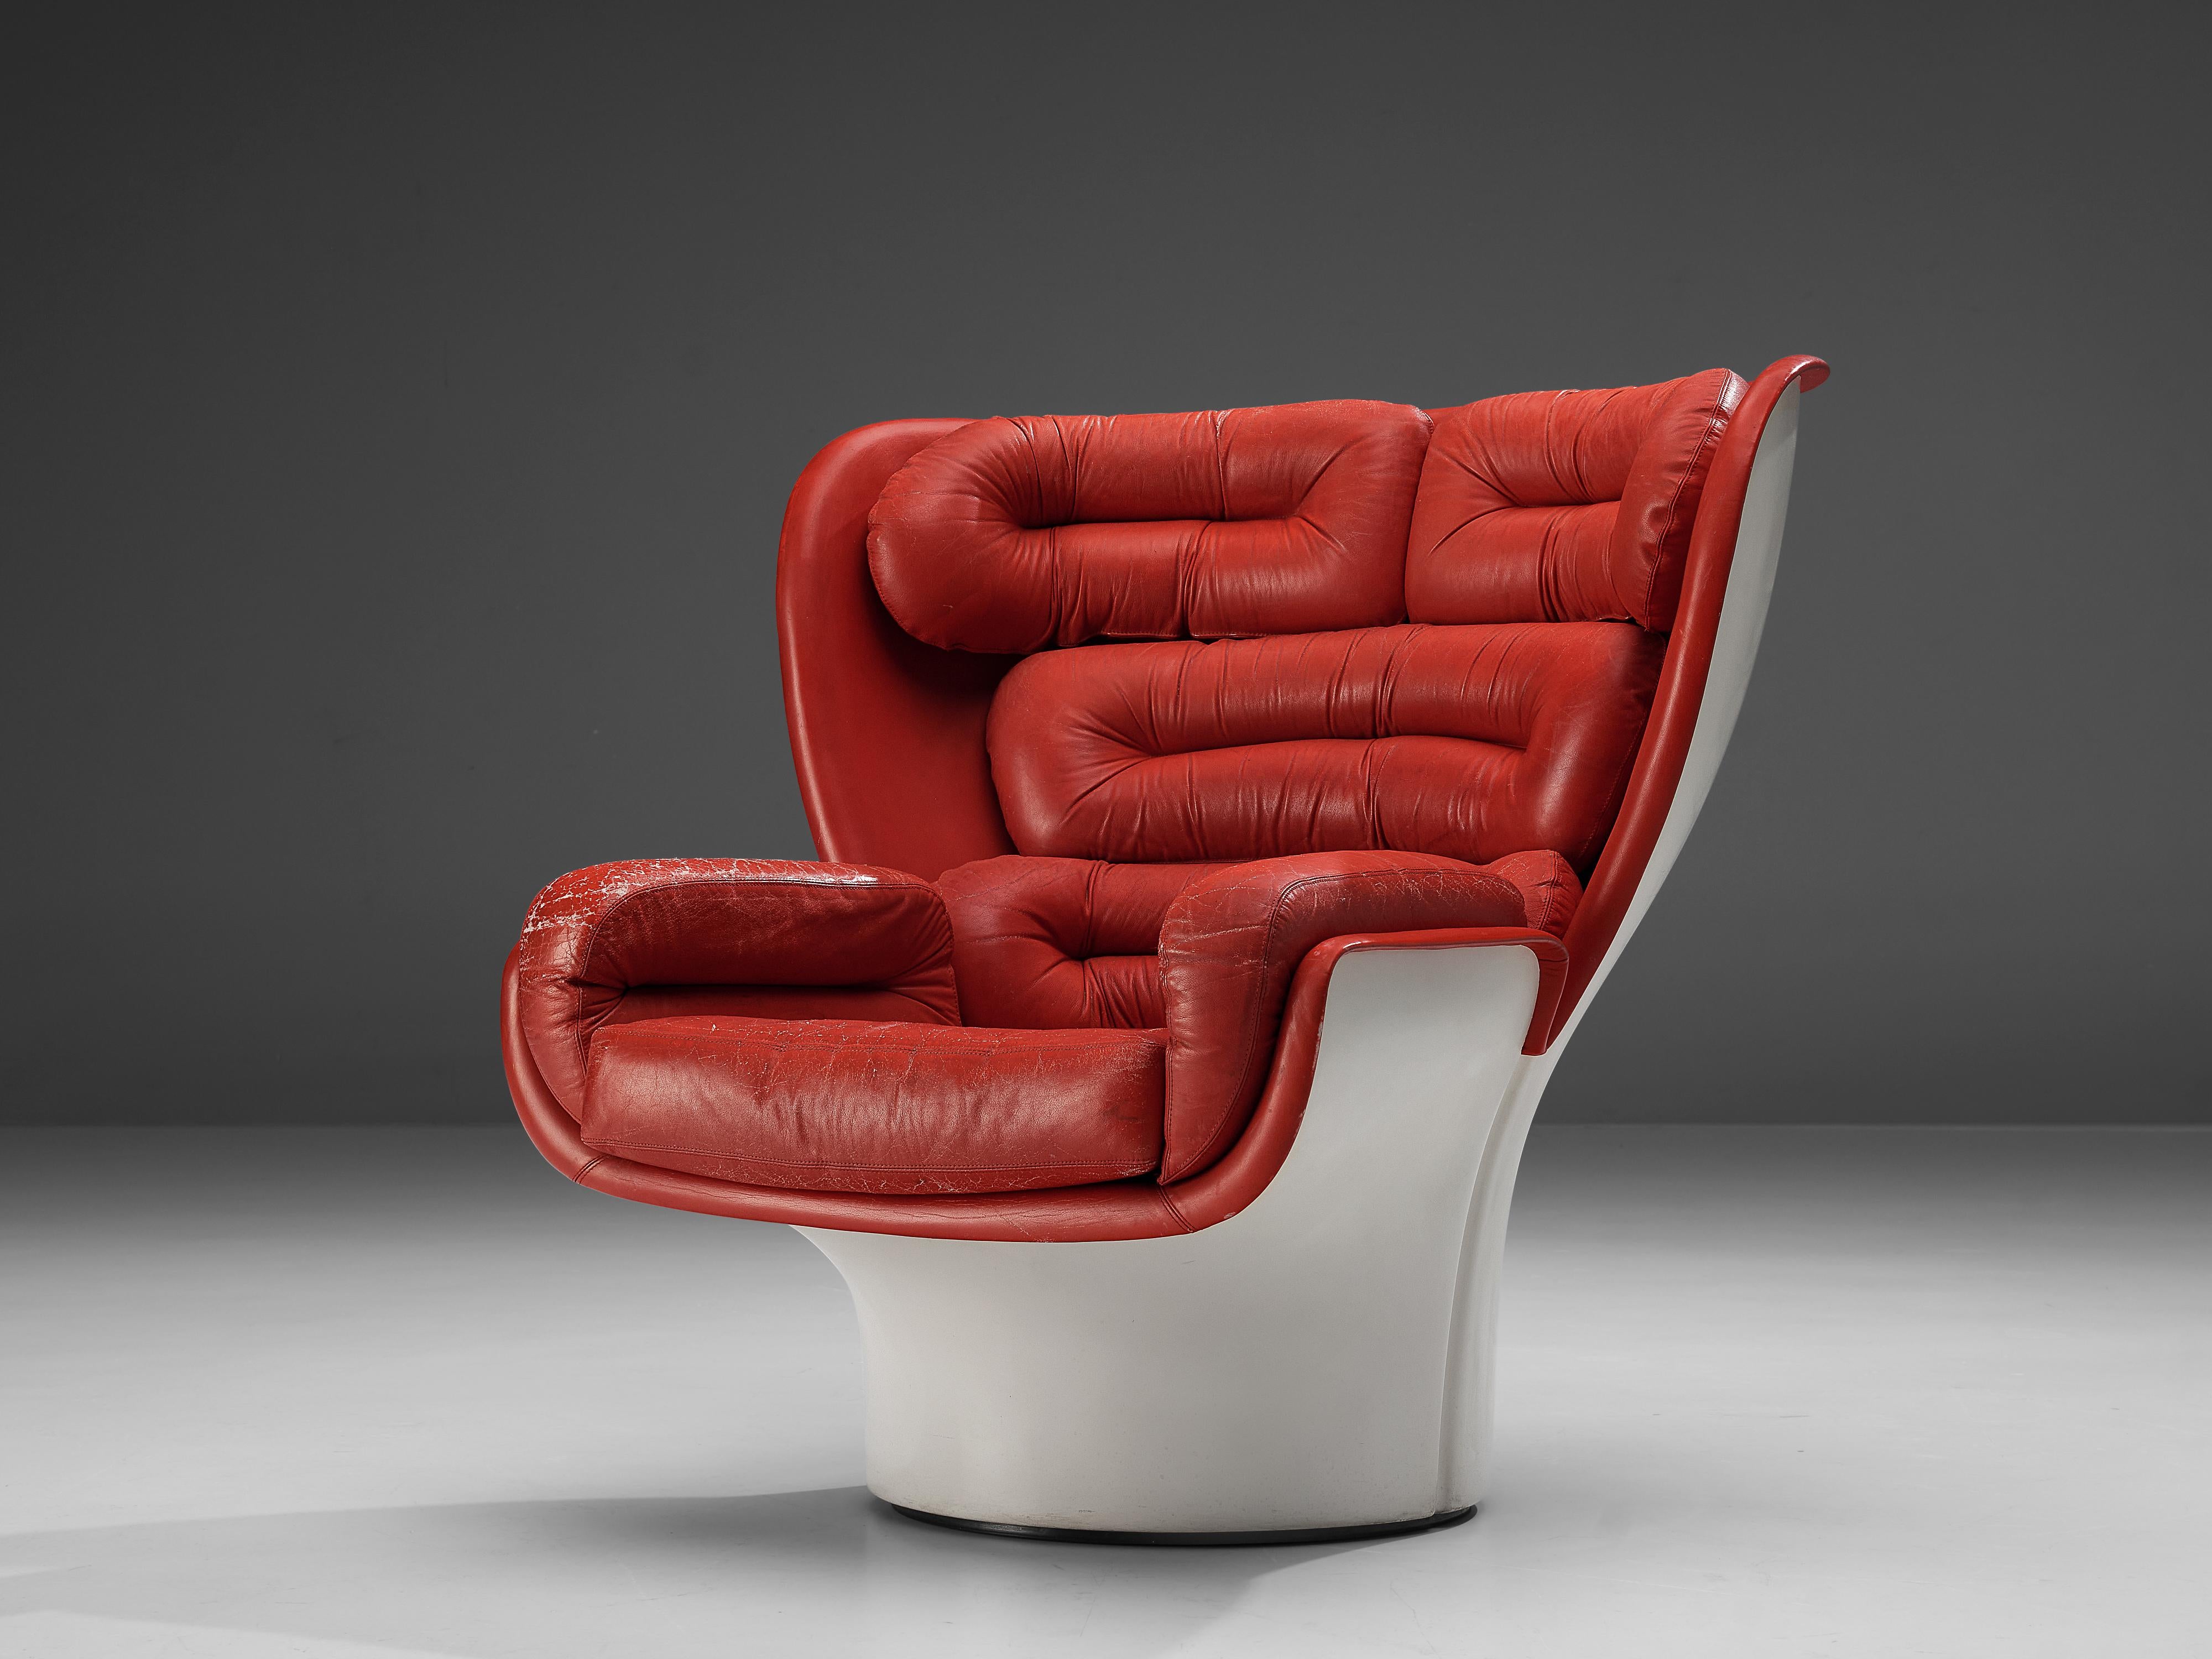 Joe Colombo for Comfort, lounge chair ‘Elda’, fiberglass, patinated red leather, Italy, design 1963, later production 

The ‘Elda’ chair is one of the most well-known designs of Italian designer Joe Colombo. This lounge chair is one of the first